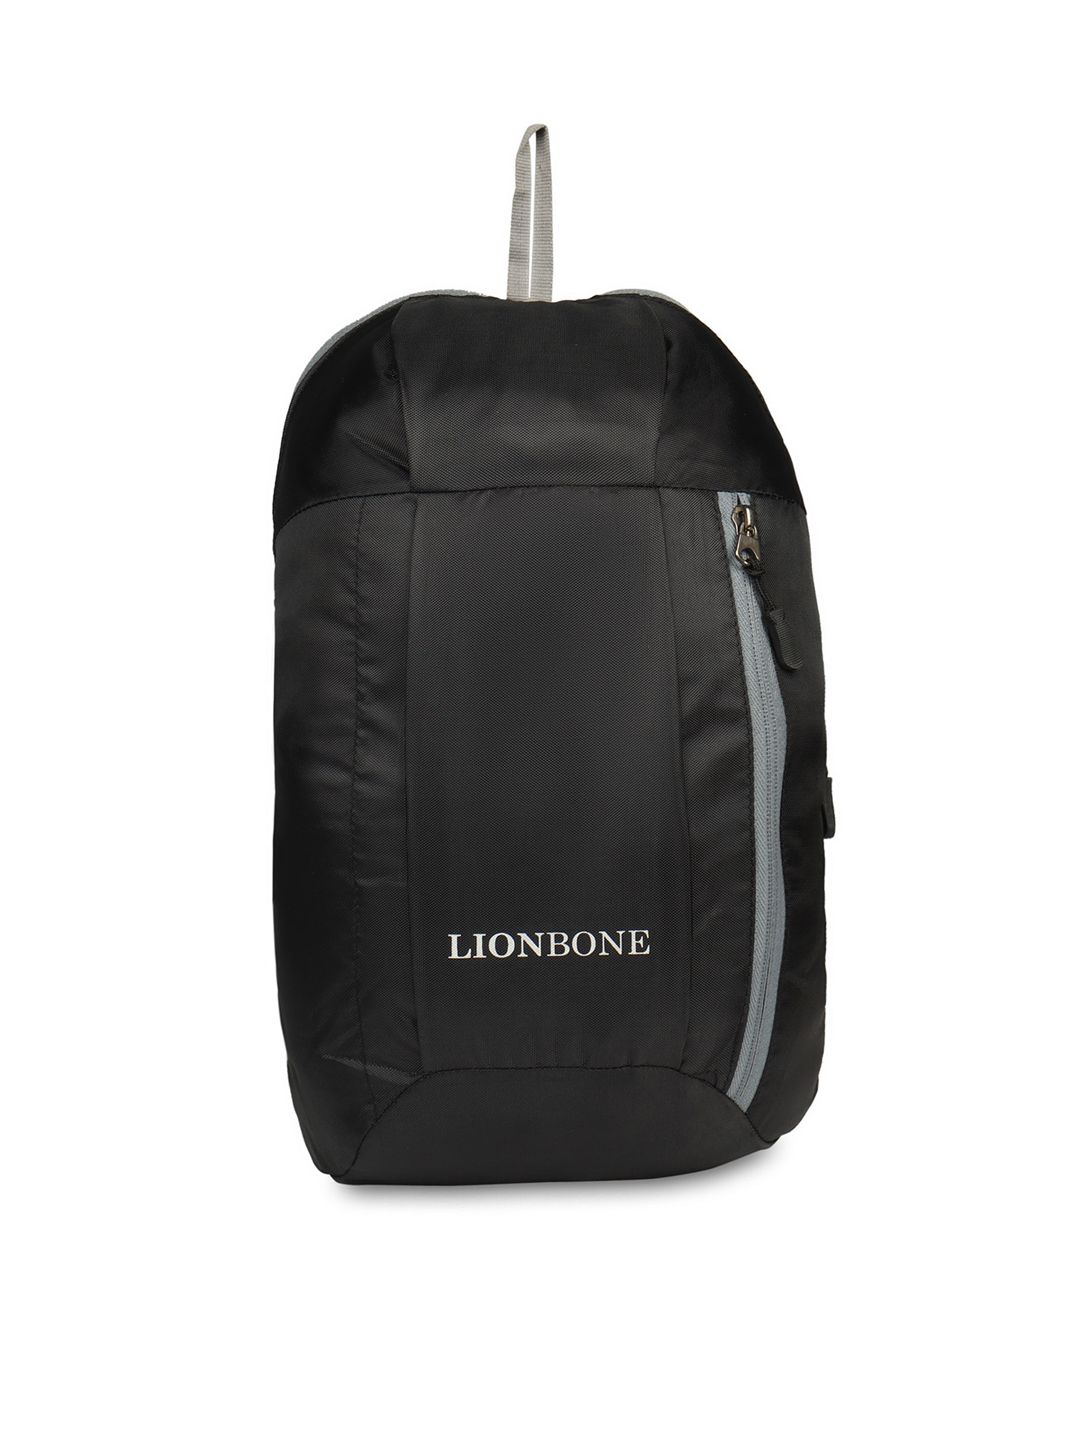 LIONBONE Unisex Black Solid Hiking Backpack Price in India